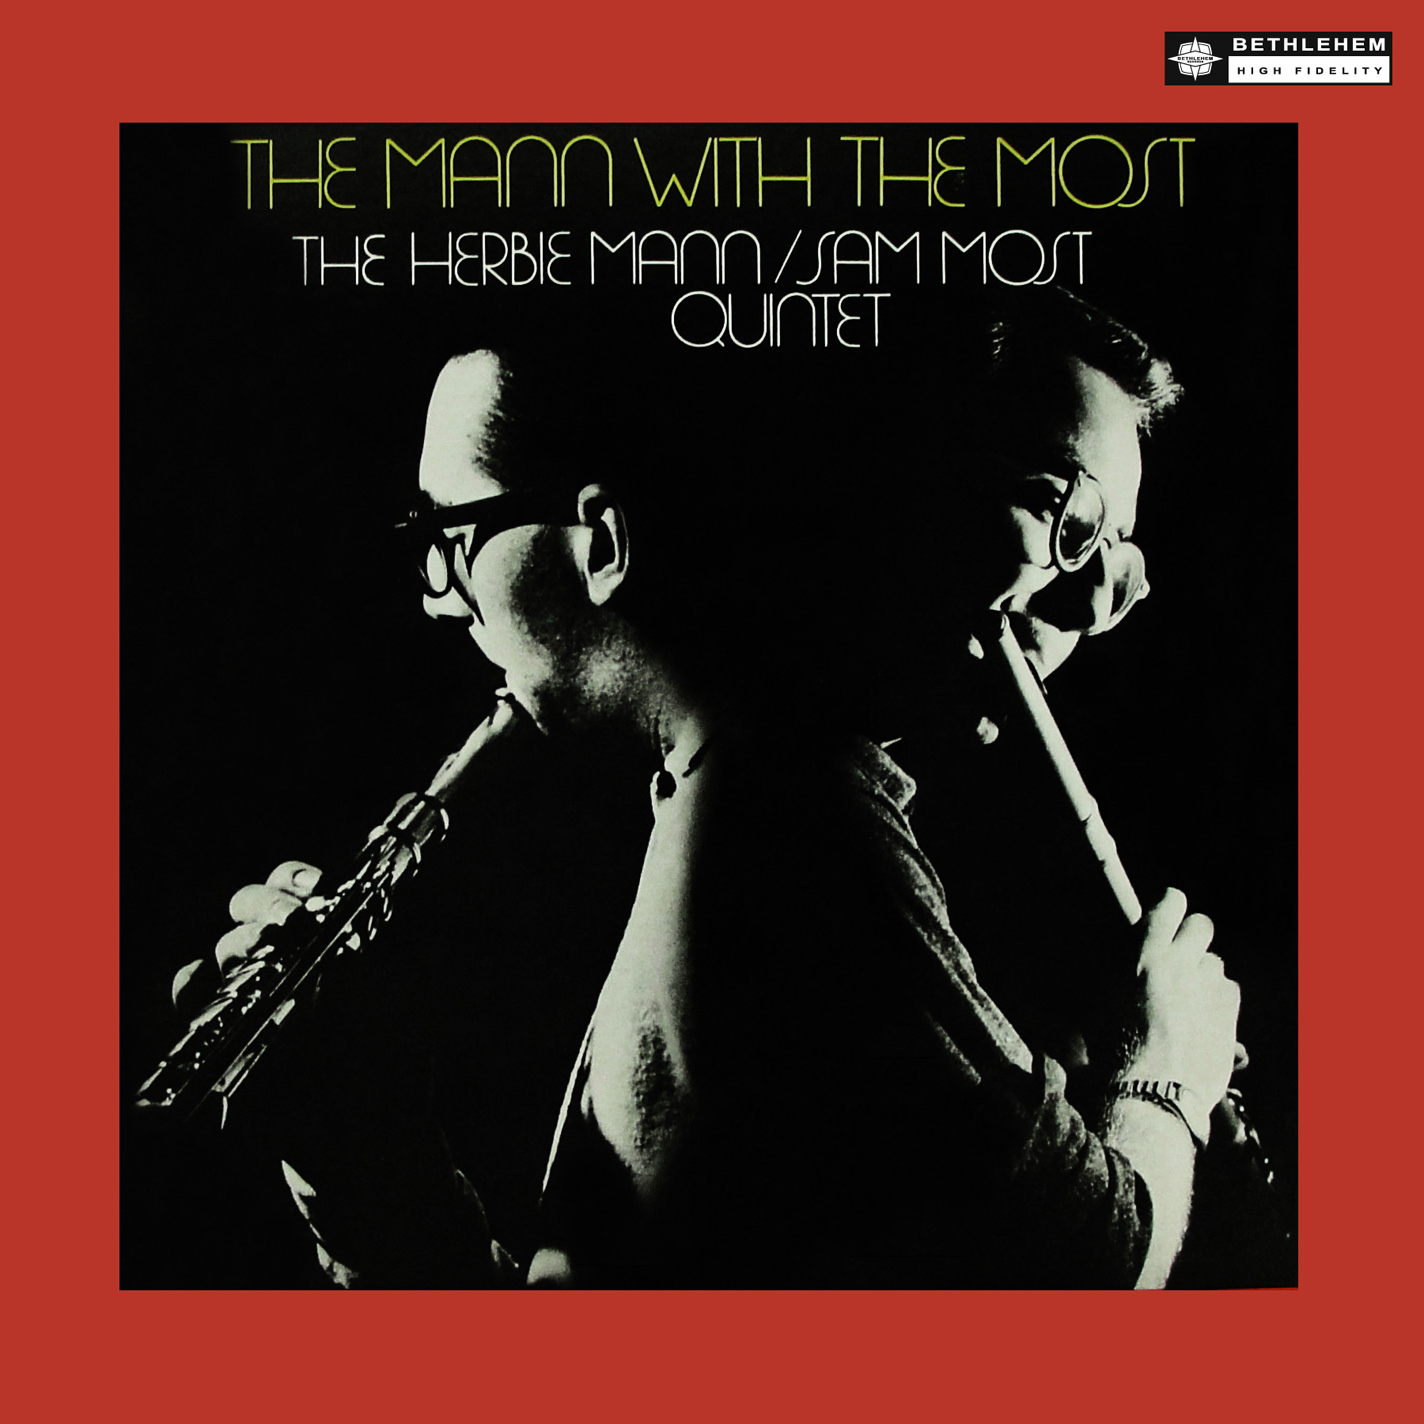 The Herbie Mann & Sam Most Quintet - The Mann With The Most (1956/2014) [PrestoClassical FLAC 24bit/96kHz]